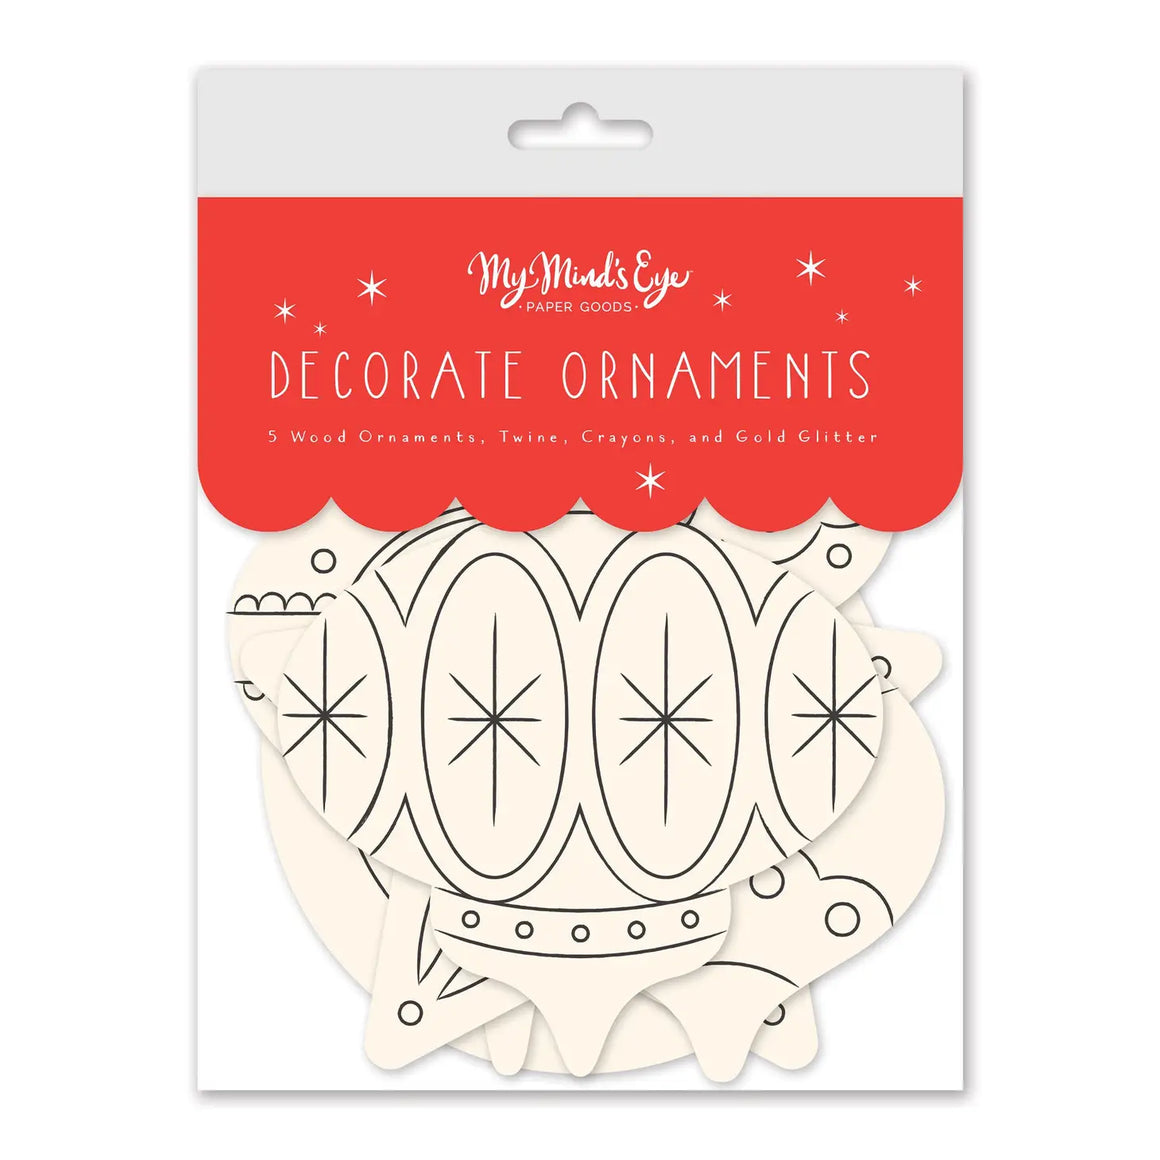 CRAFT KIT - MAKE YOUR OWN WOOD ORNAMENTS